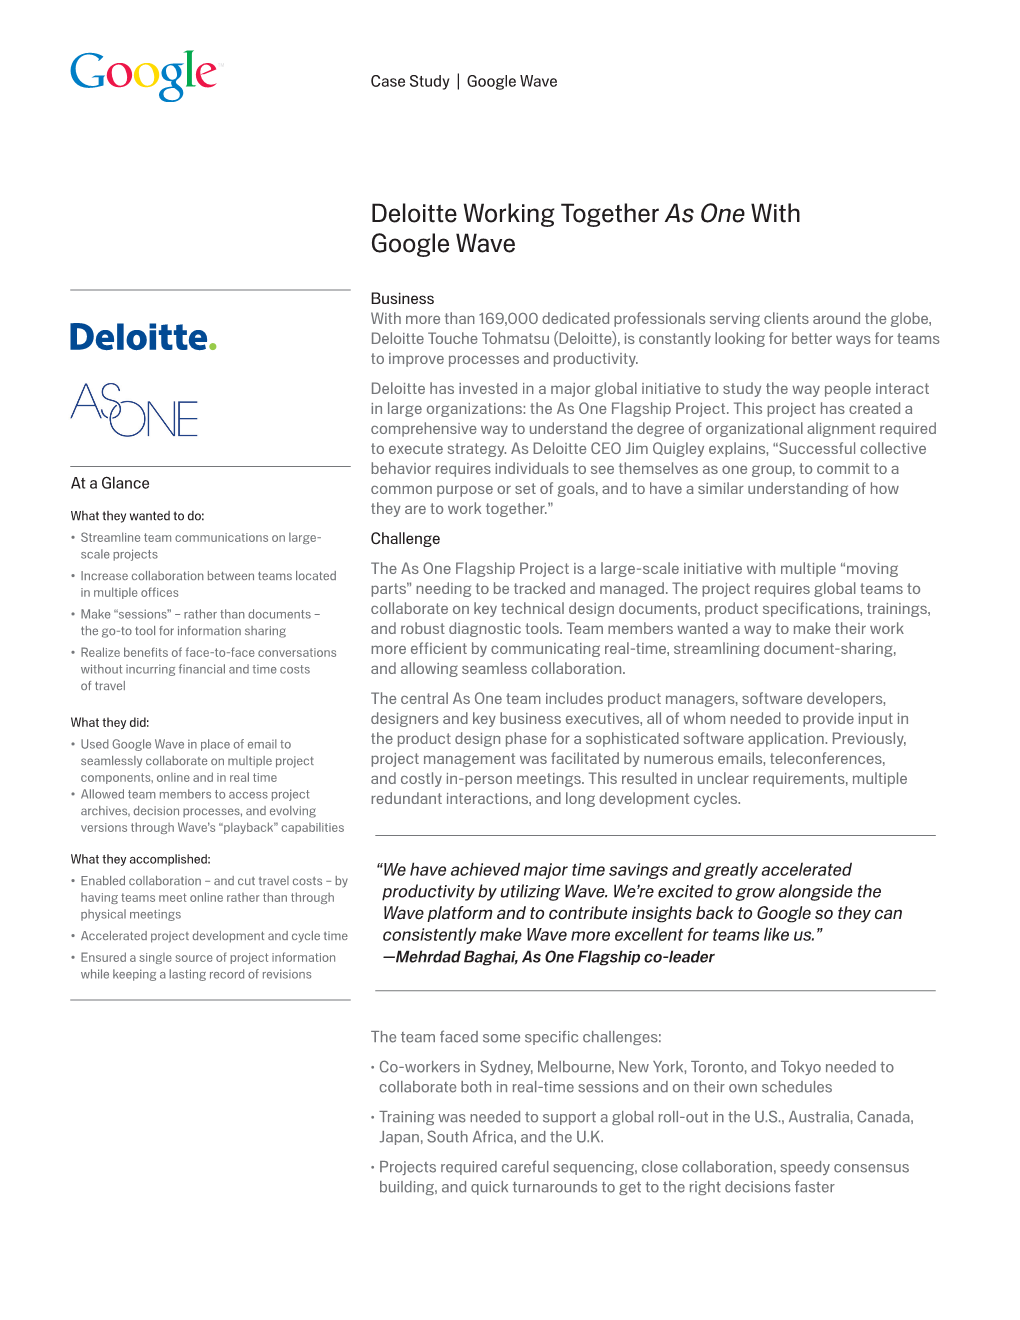 Deloitte Working Together As One with Google Wave